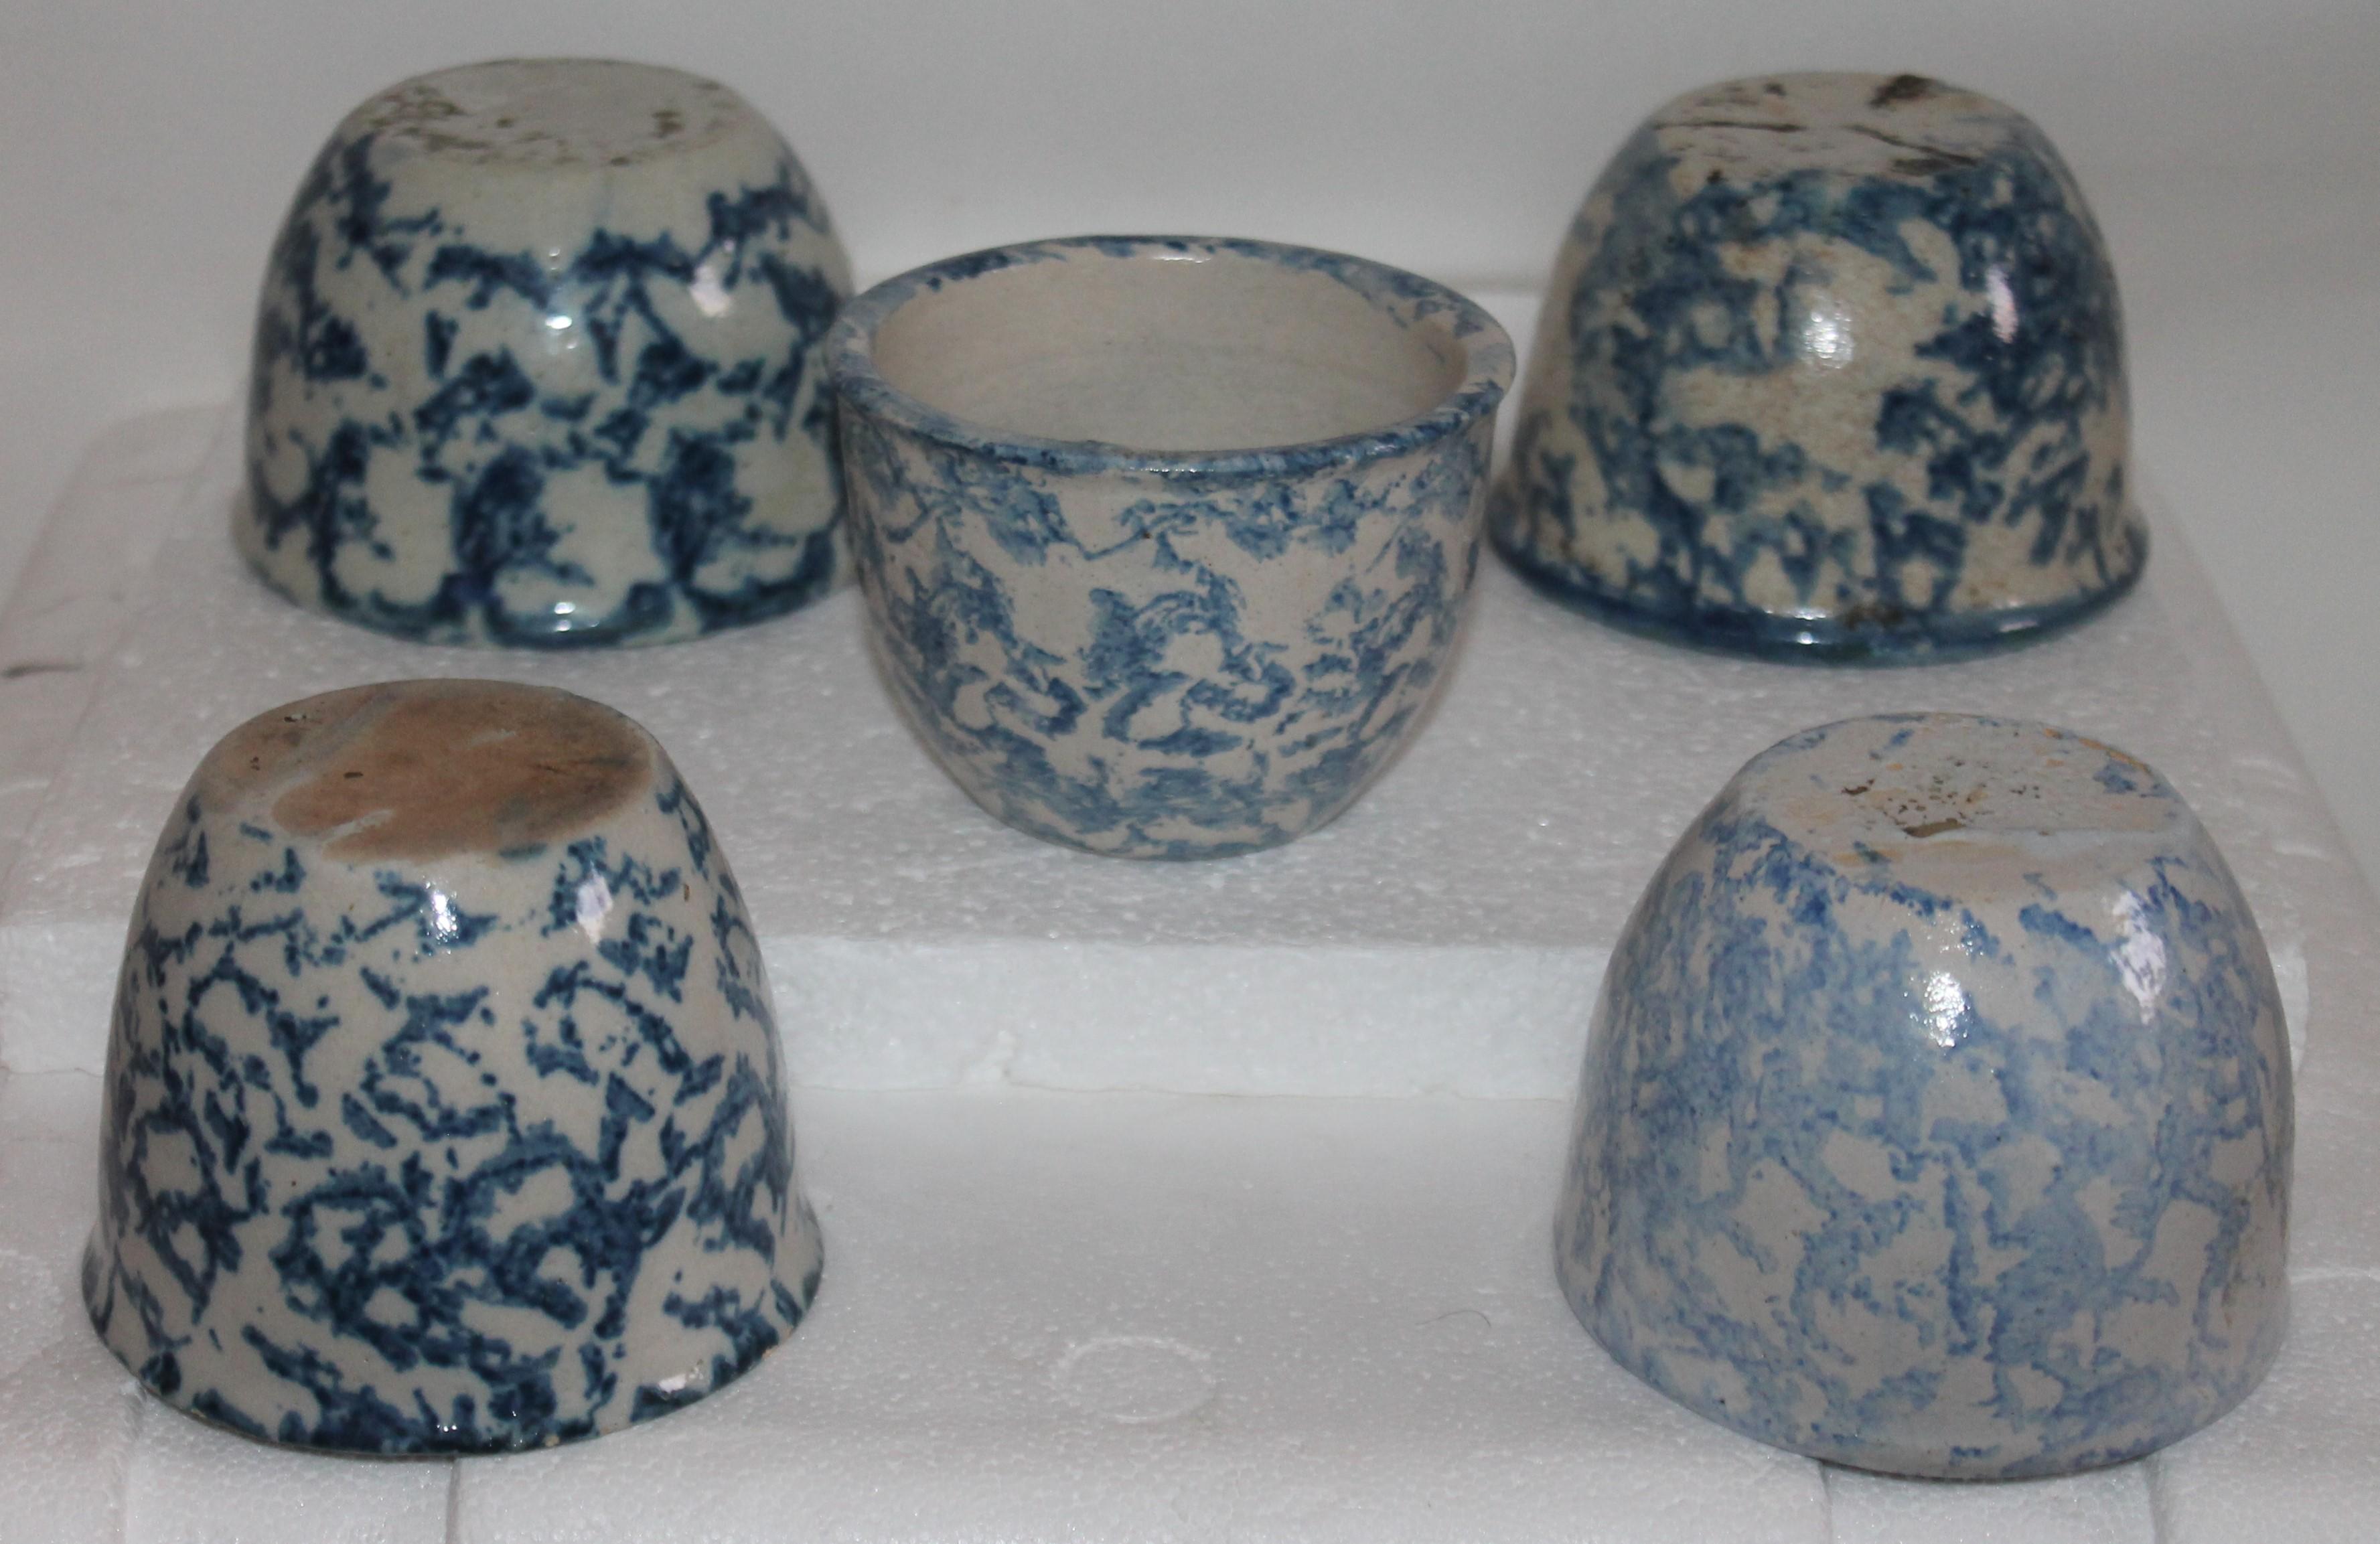 This collection of five 19th century sponge ware pottery custard cups ate in good condition.